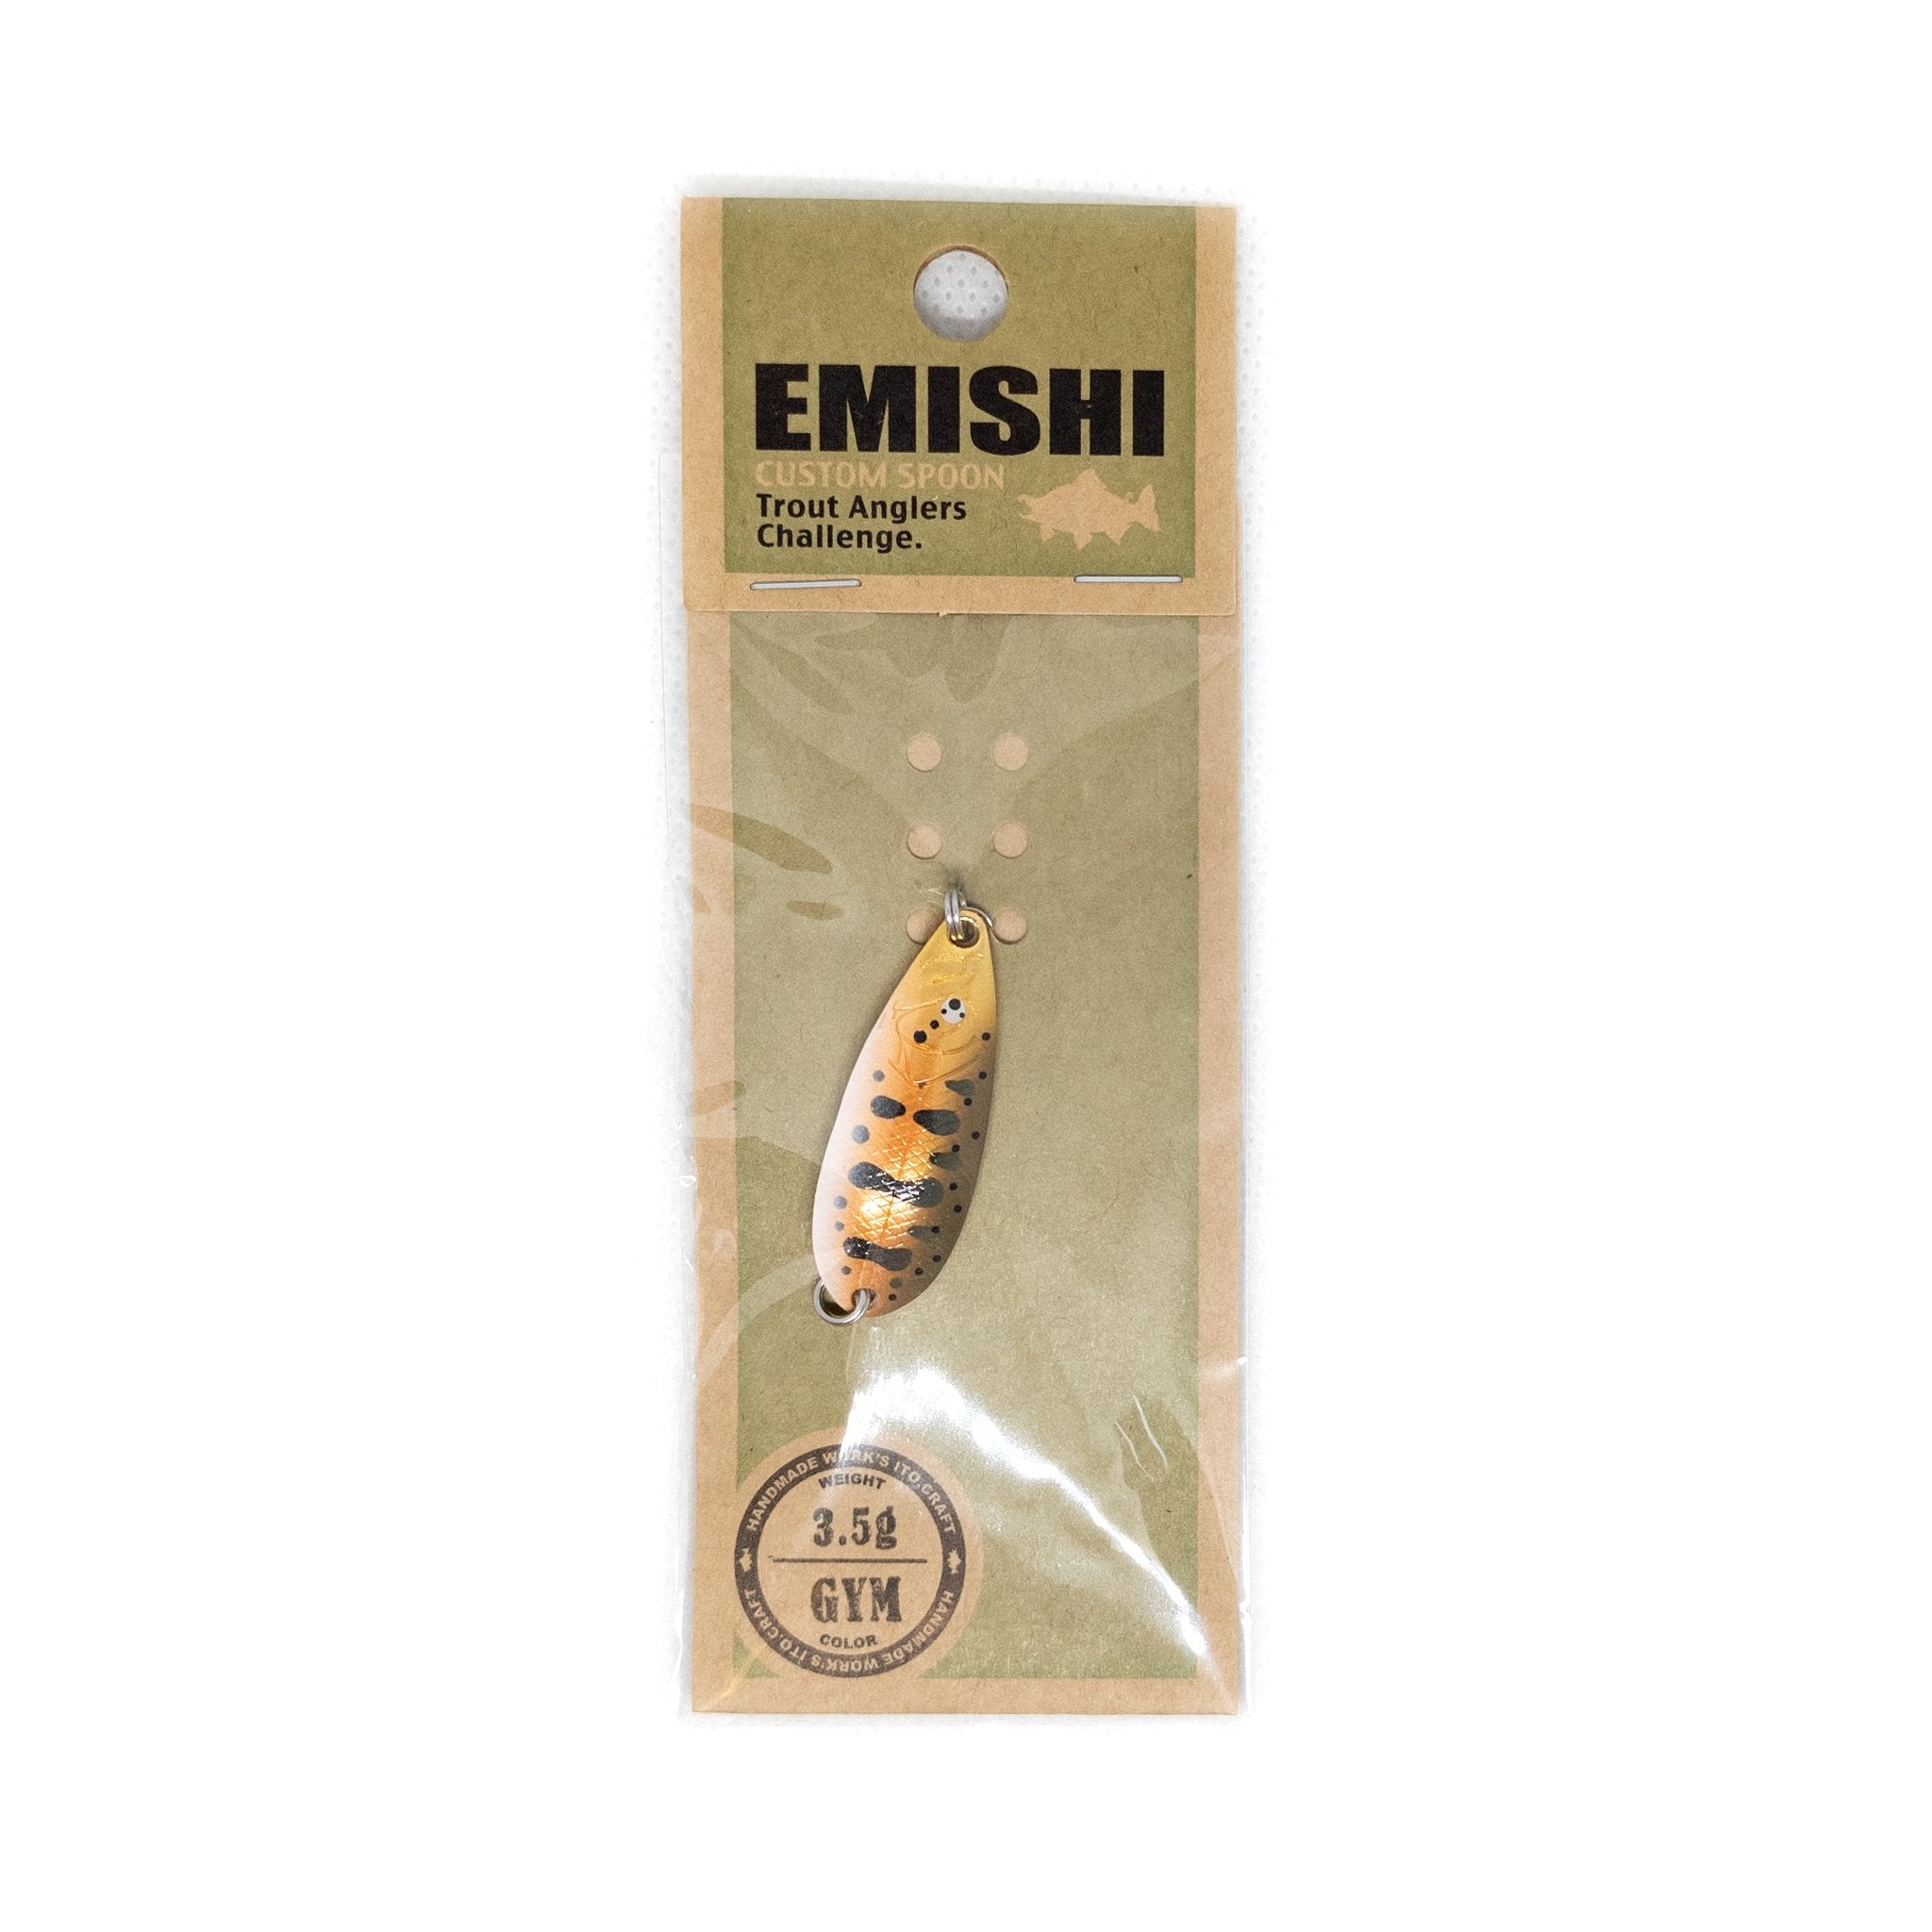 Emishi Spoon 37 3.5g Color "GYM" - The Borrowed Lure